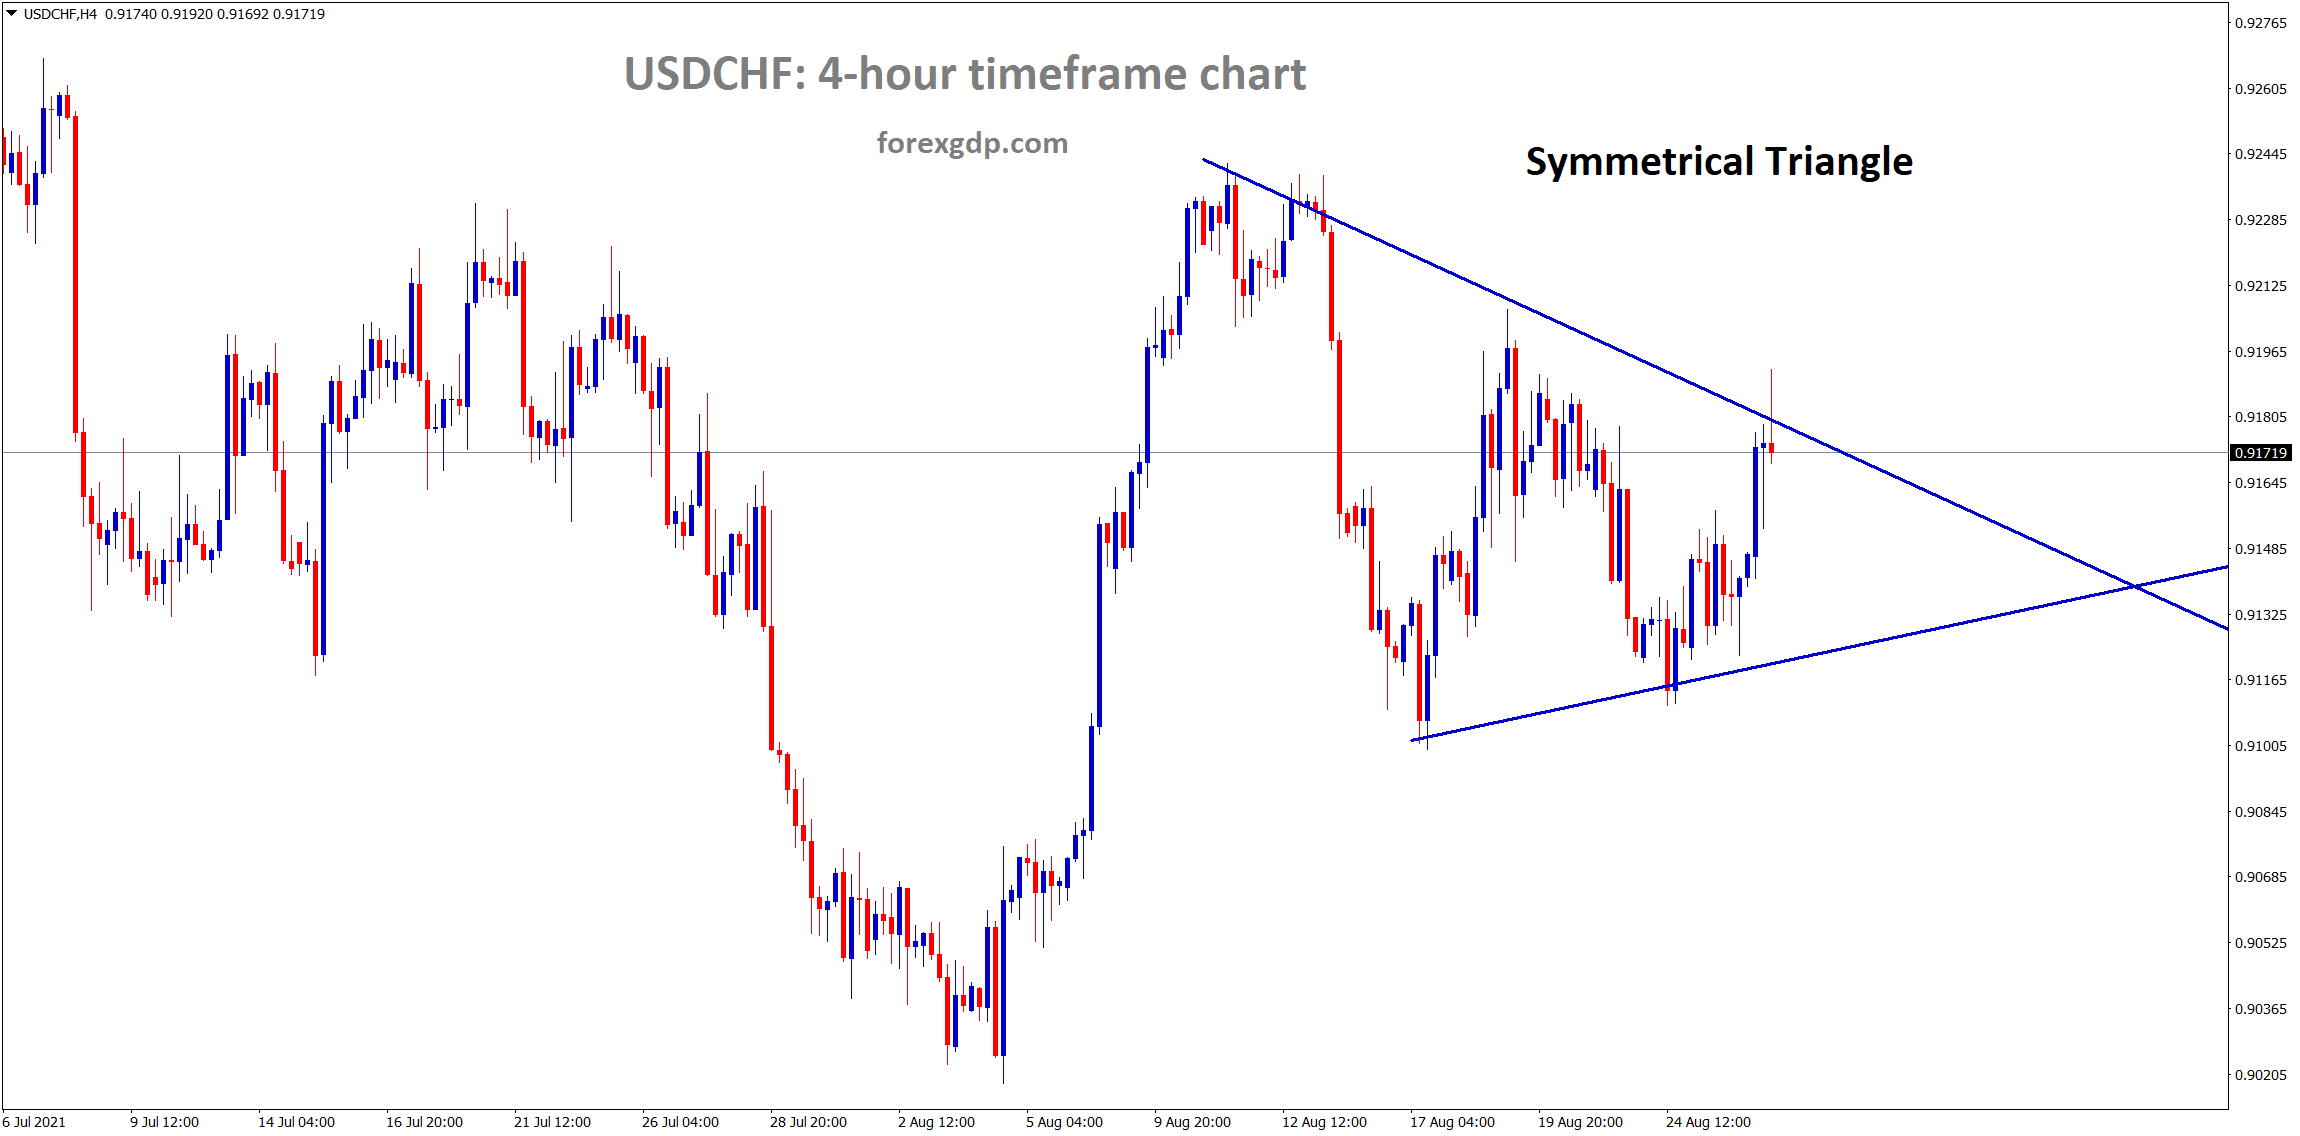 USDCHF has formed a symmetrical triangle pattern wait for the breakout